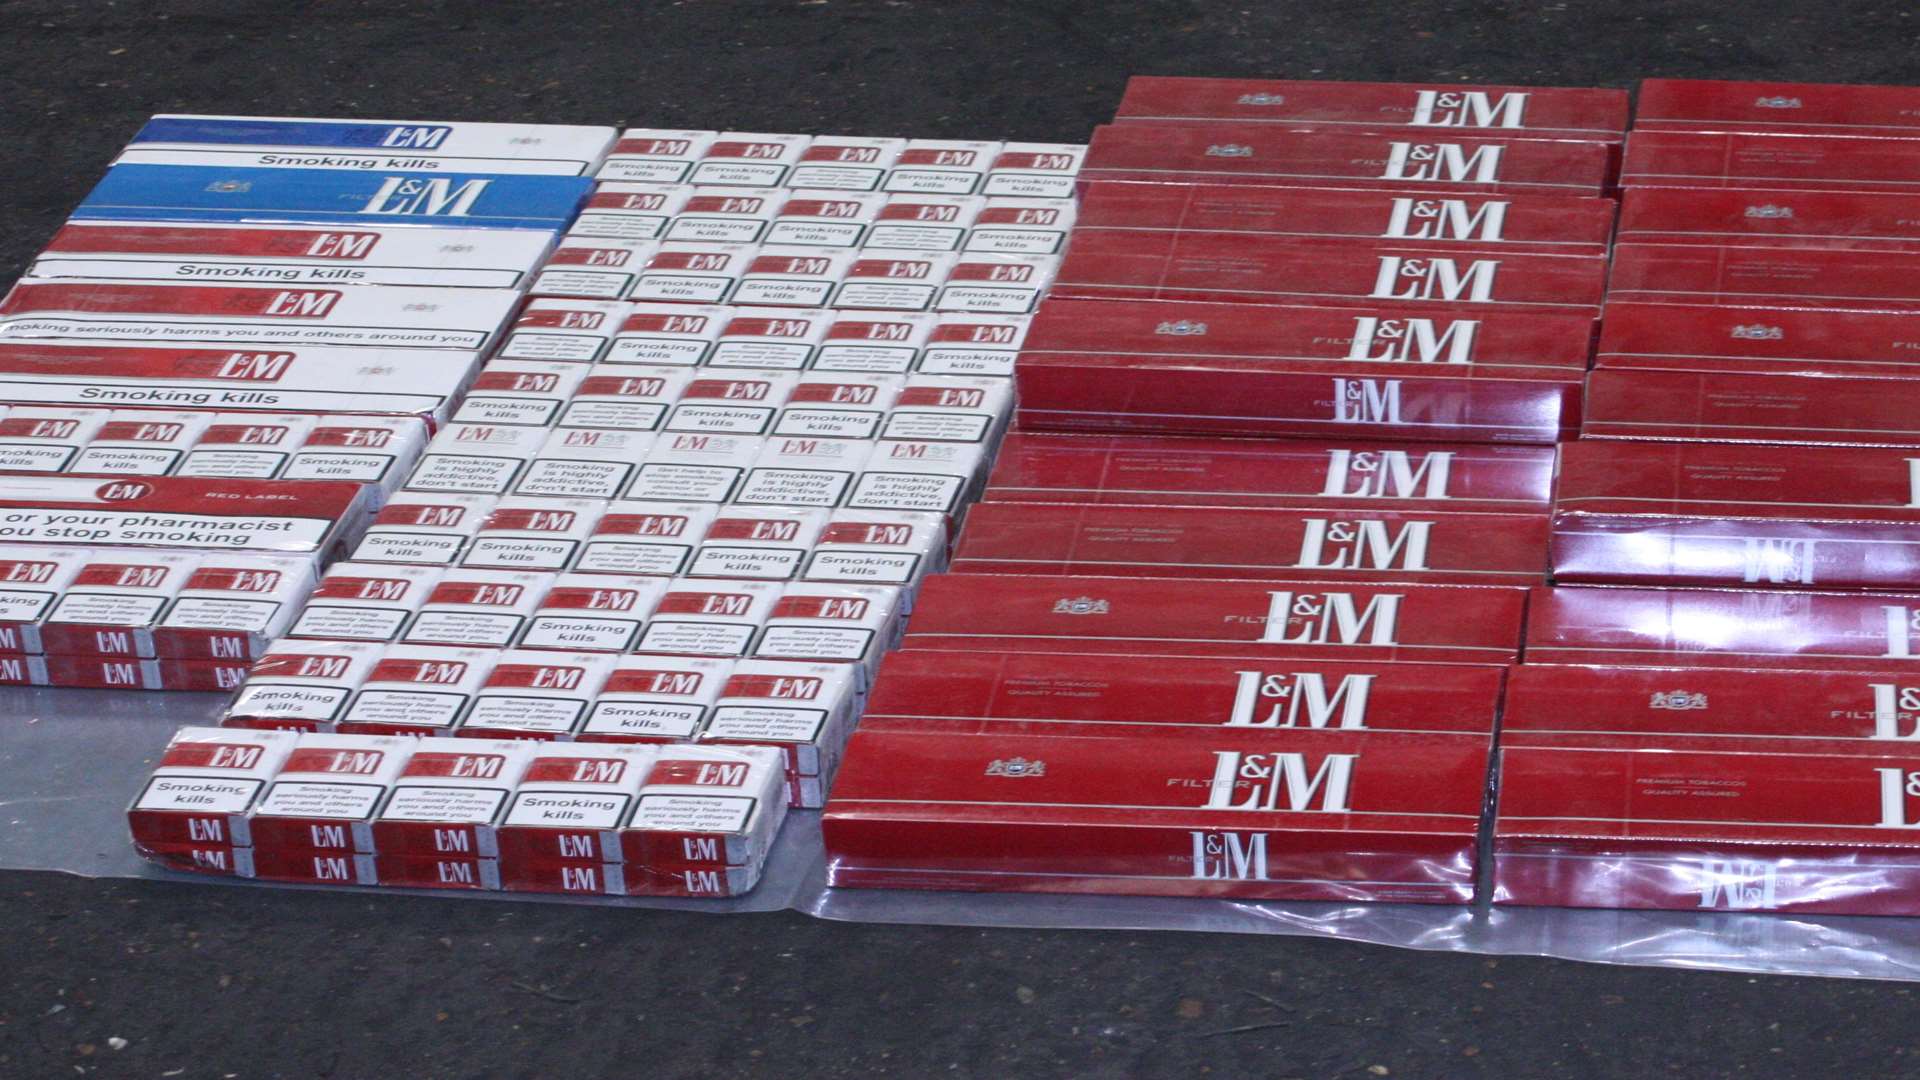 Some of the contraband cigarettes. Picture: HMRC